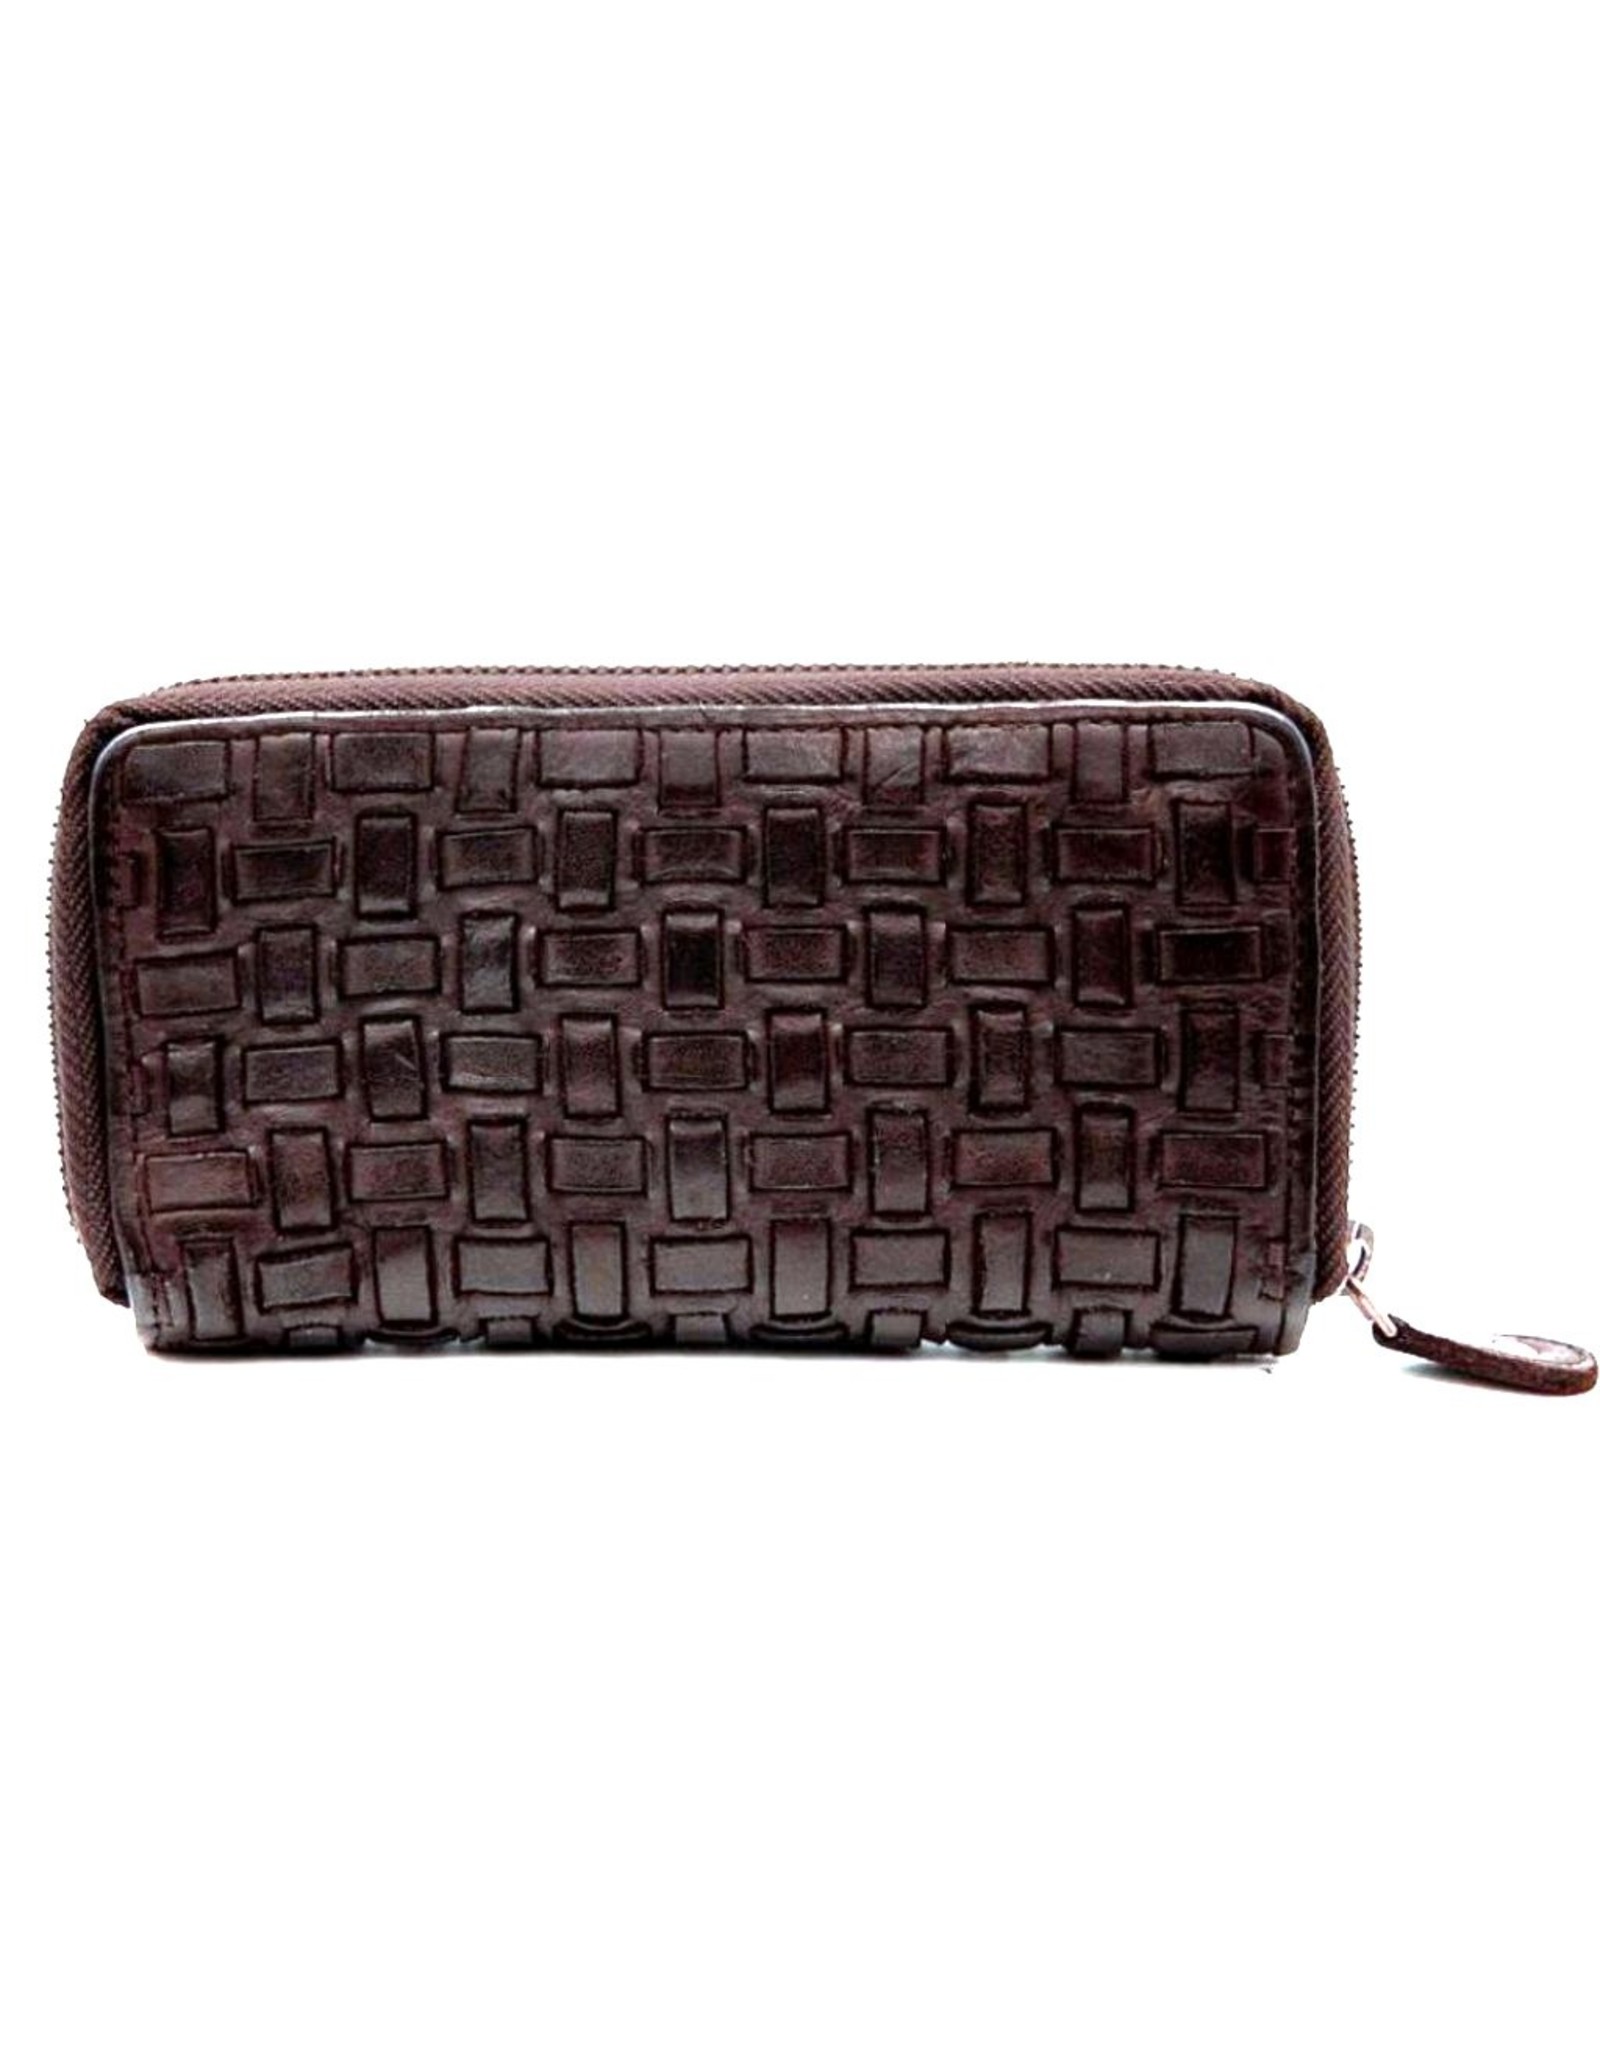 Bellicci Leather Wallets - Leather wallet braided washed leather Bellicci (mocca)